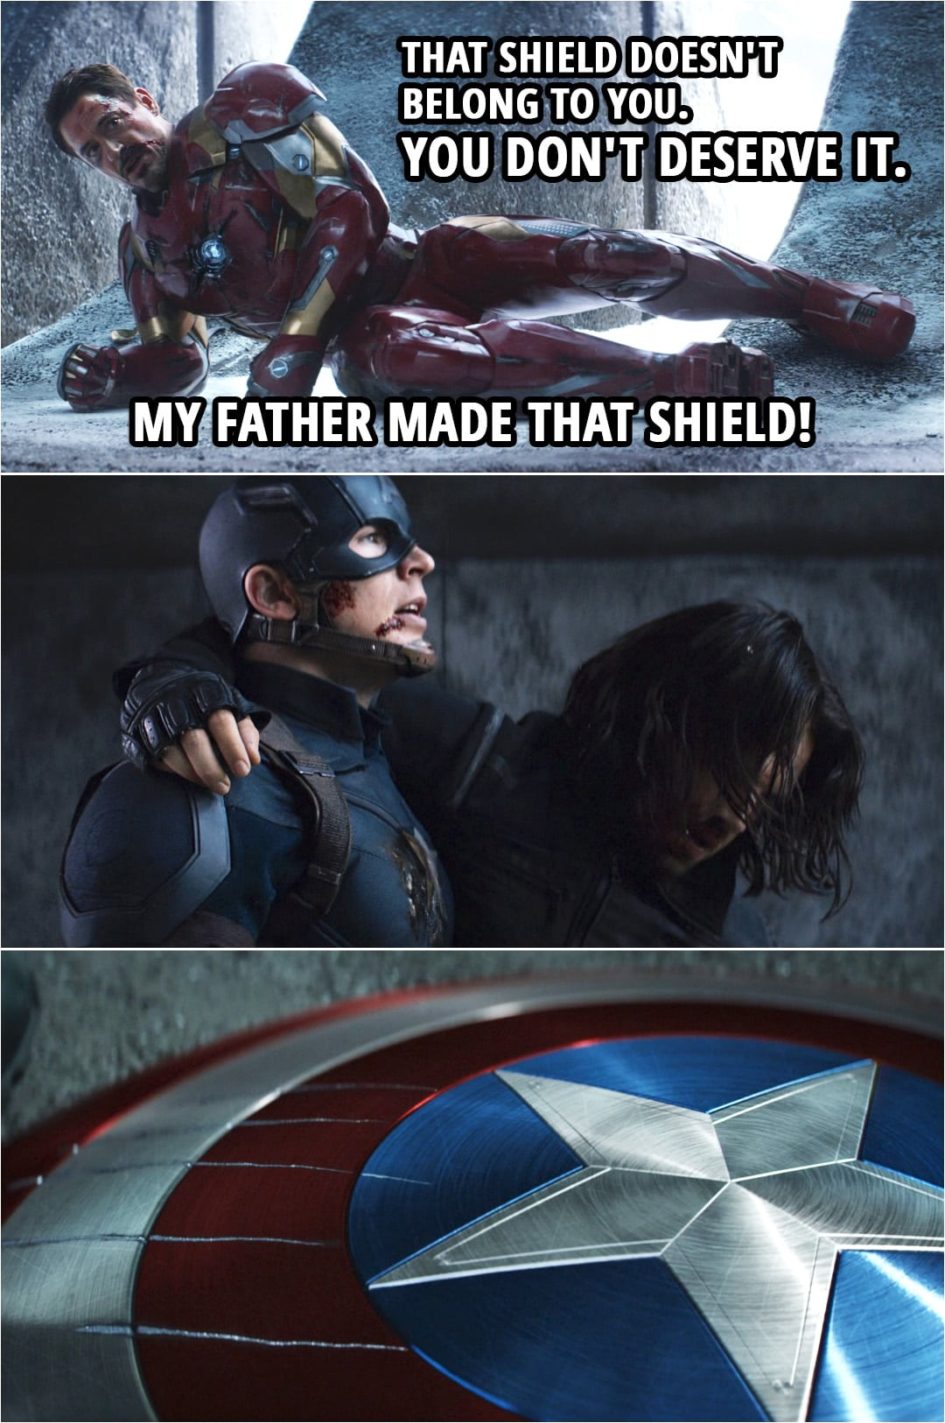 Quote from Captain America: Civil War (2016) | Tony Stark (to Steve): That shield doesn't belong to you. You don't deserve it. My father made that shield! (Steve drops the shield as he leaves...)